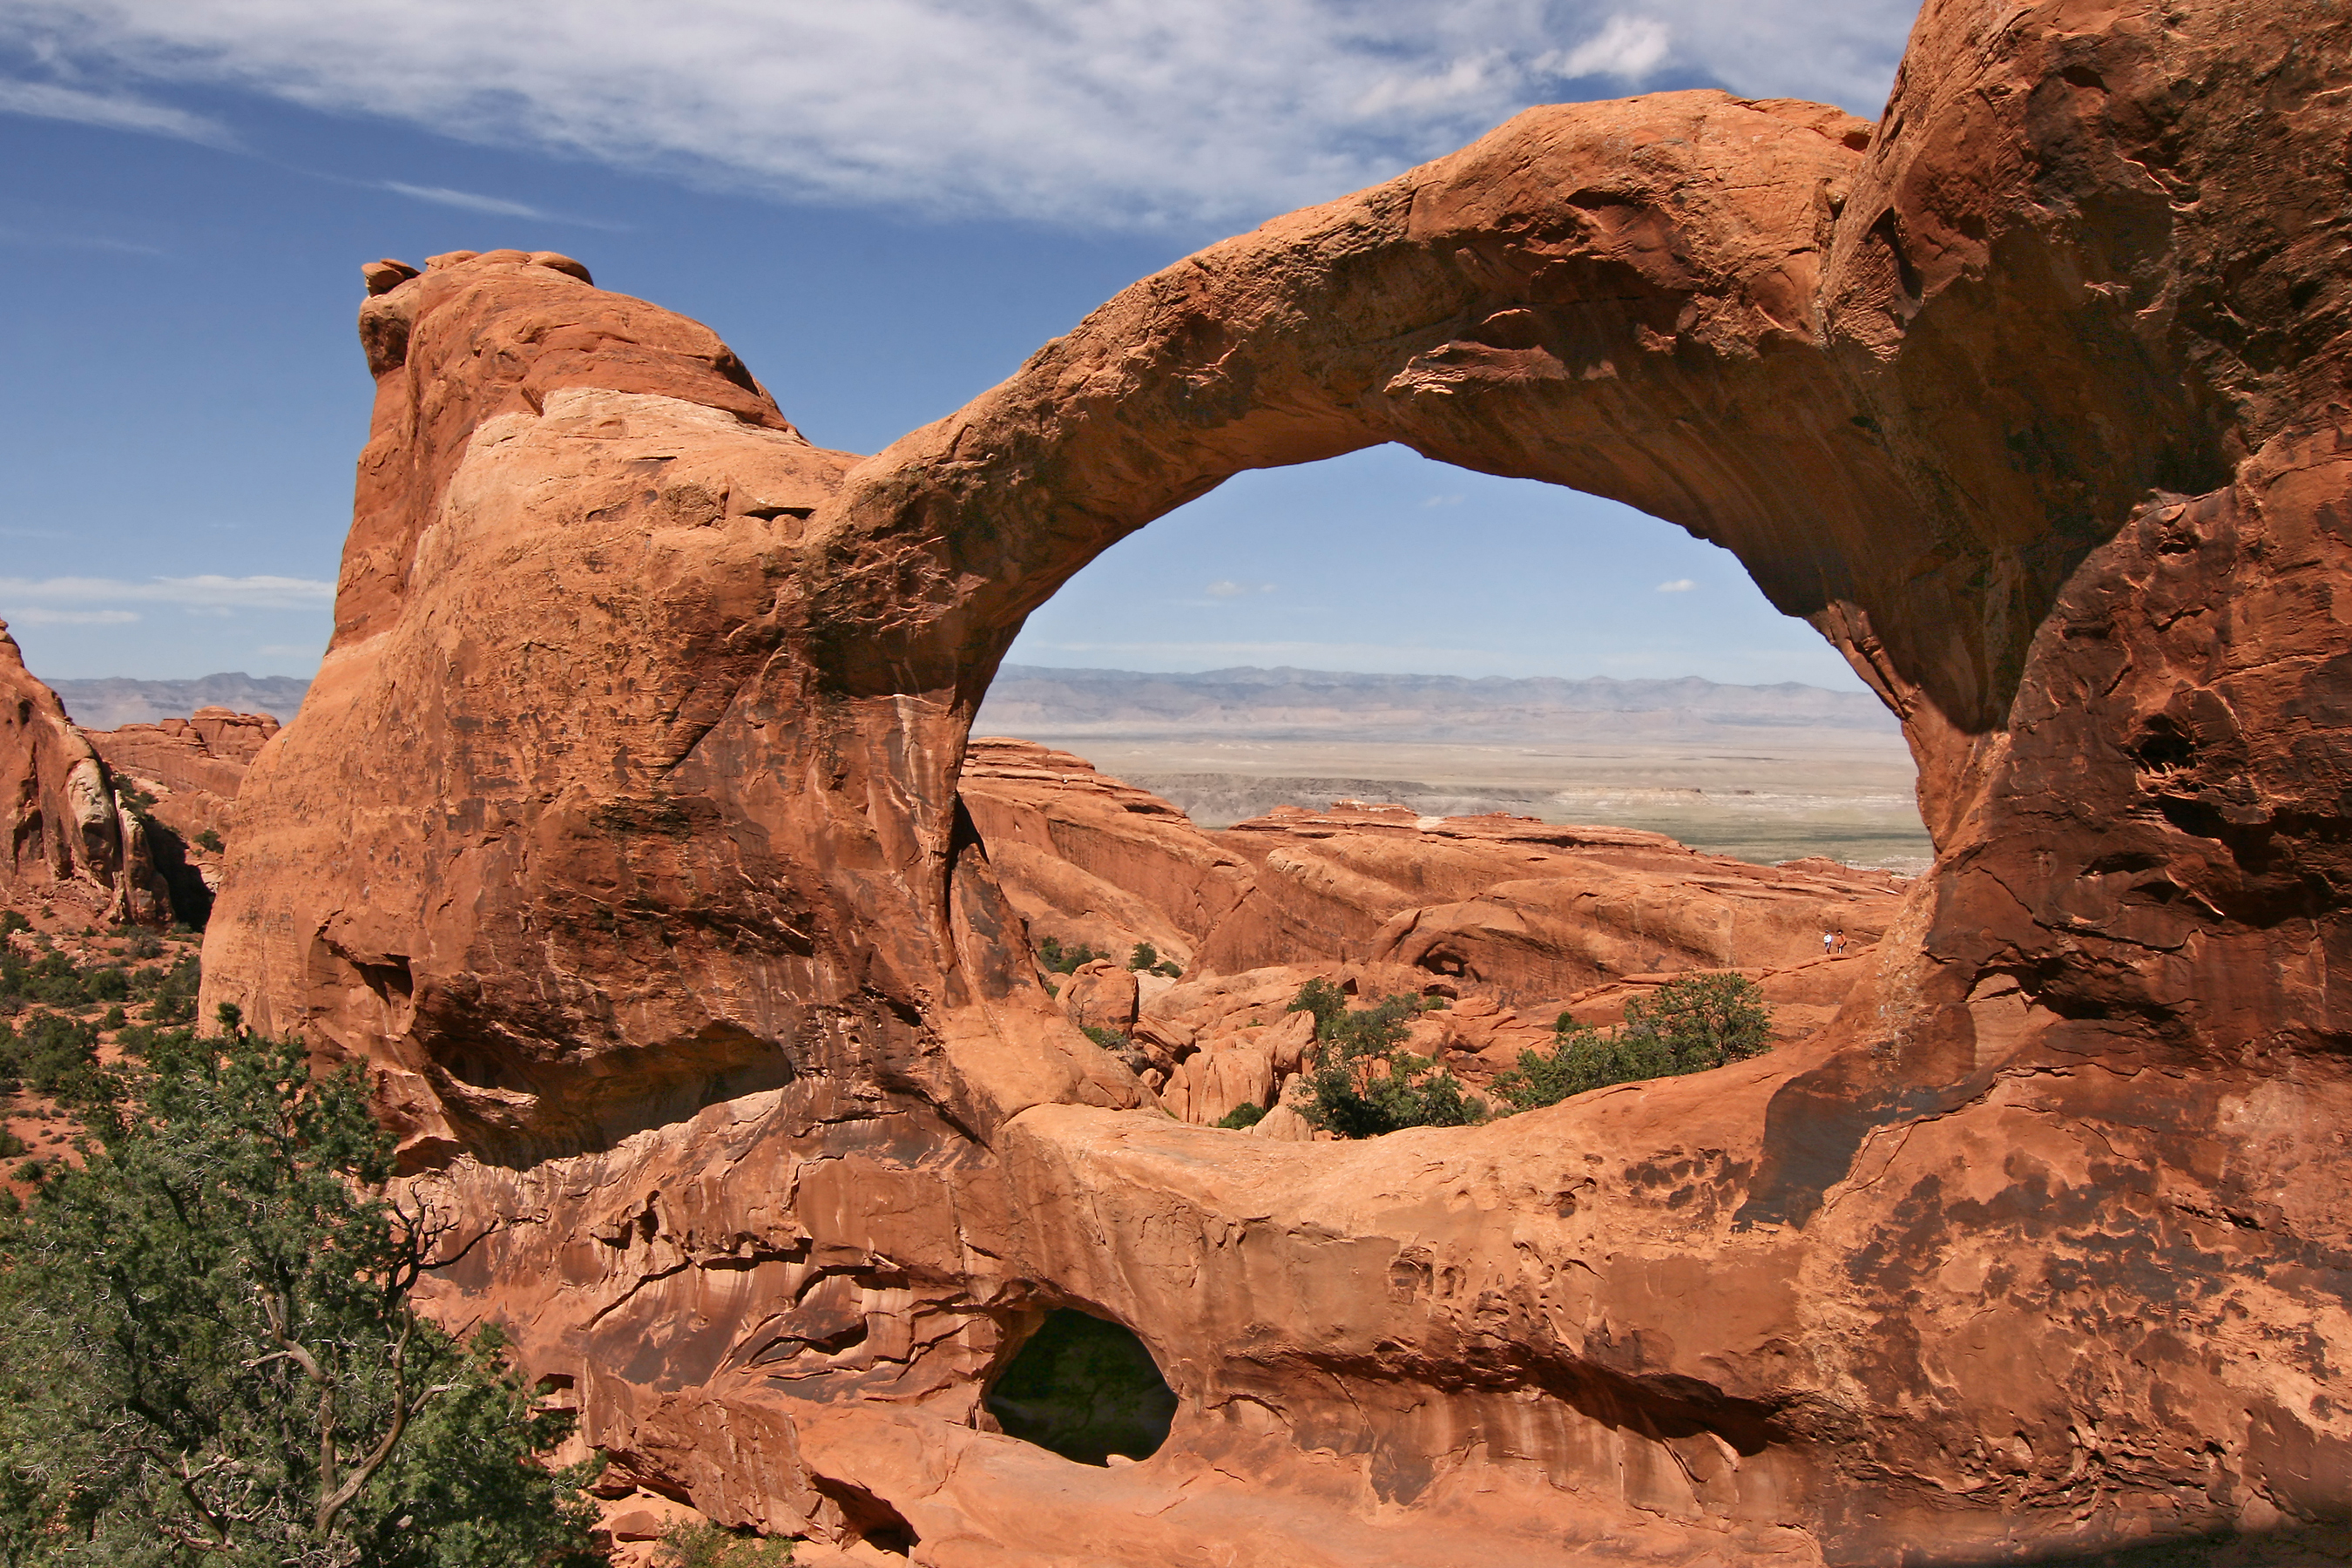 File:Double-O-Arch Arches National Park 2.jpg - Wikipedia